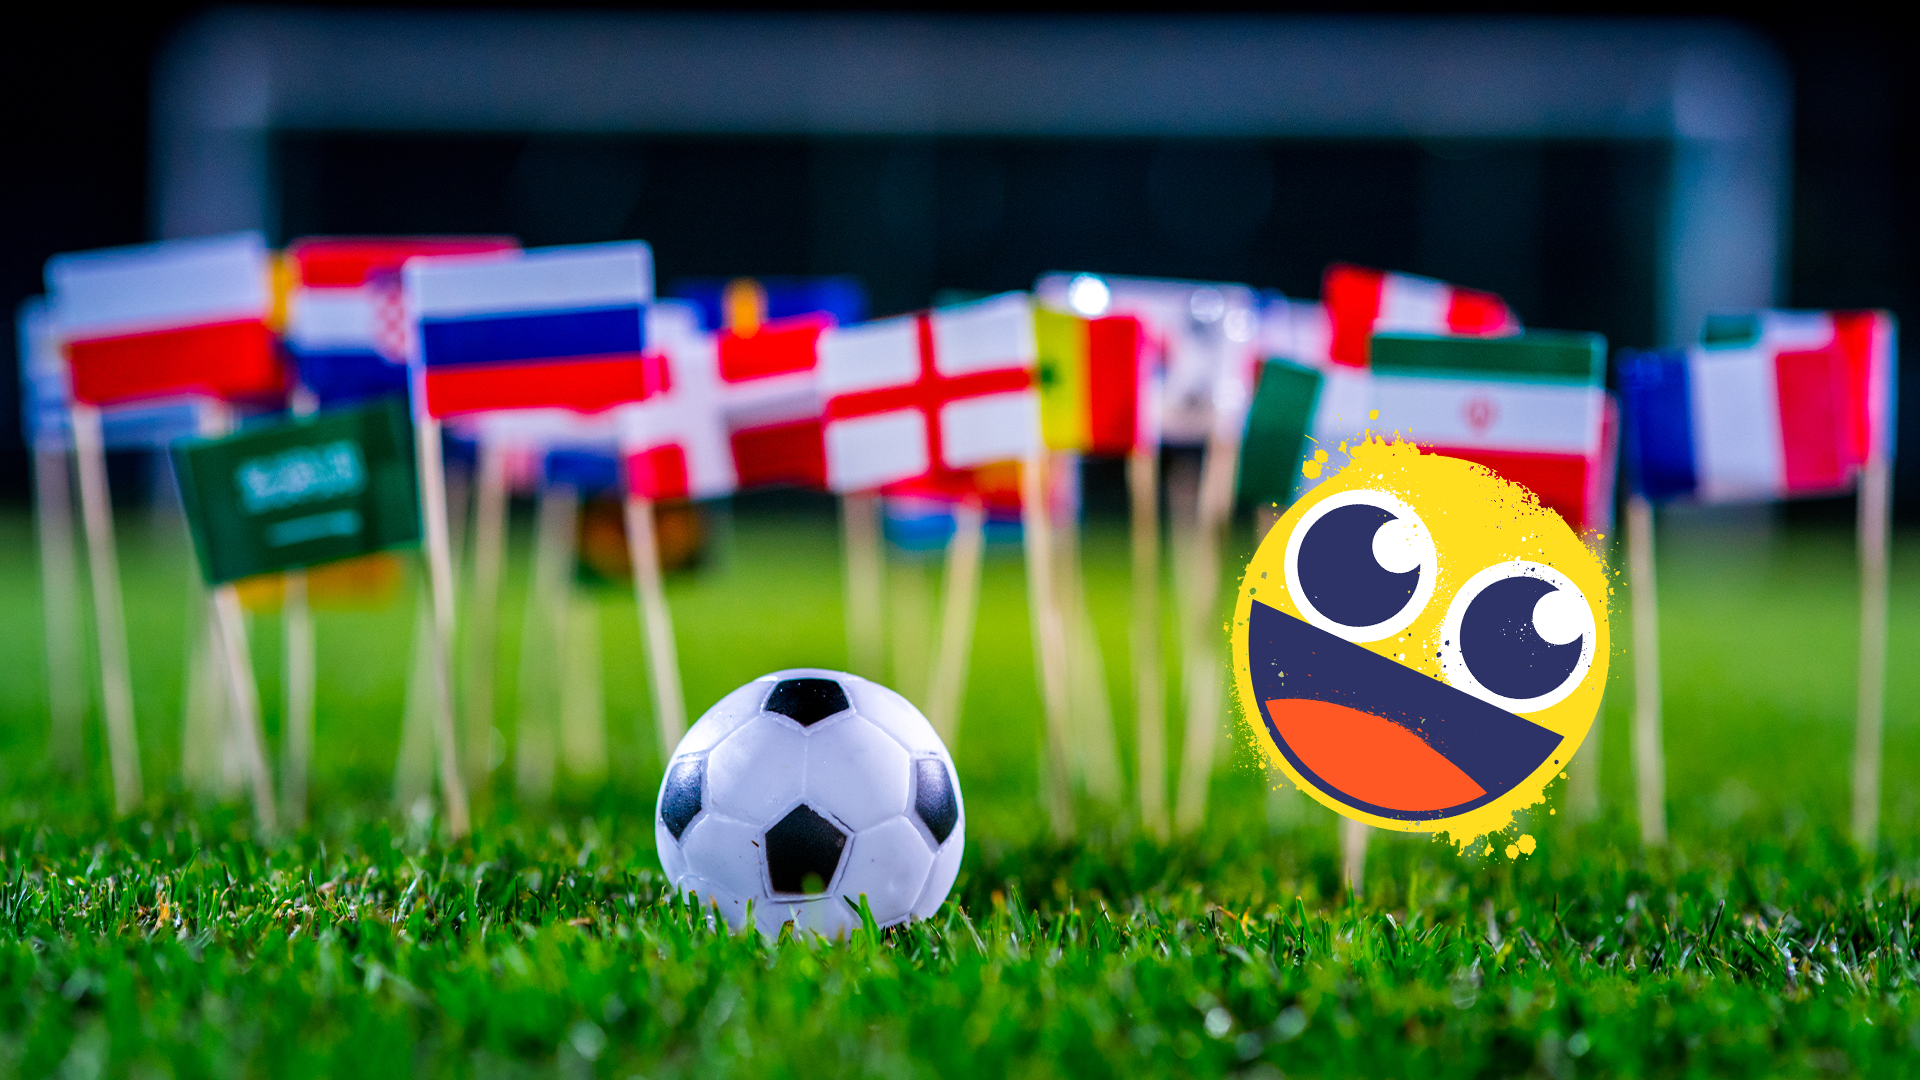 World flags in grass, football and smiley emoji 